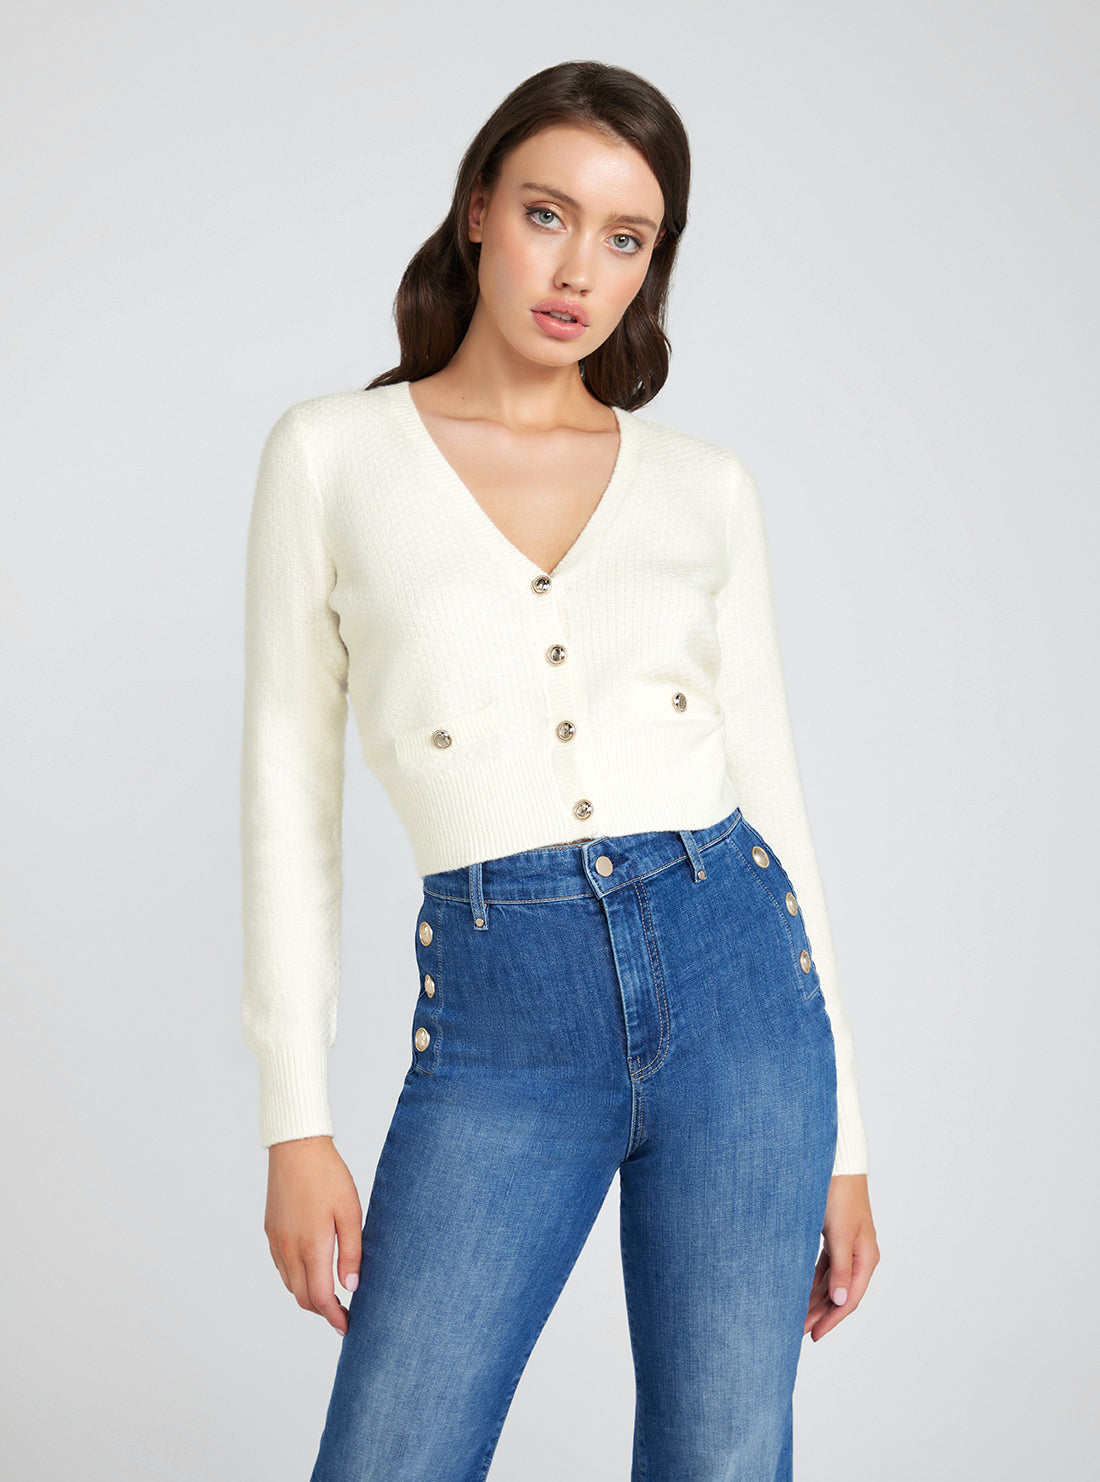 White Sophie Knit Top | GUESS Women's Apparel | front view